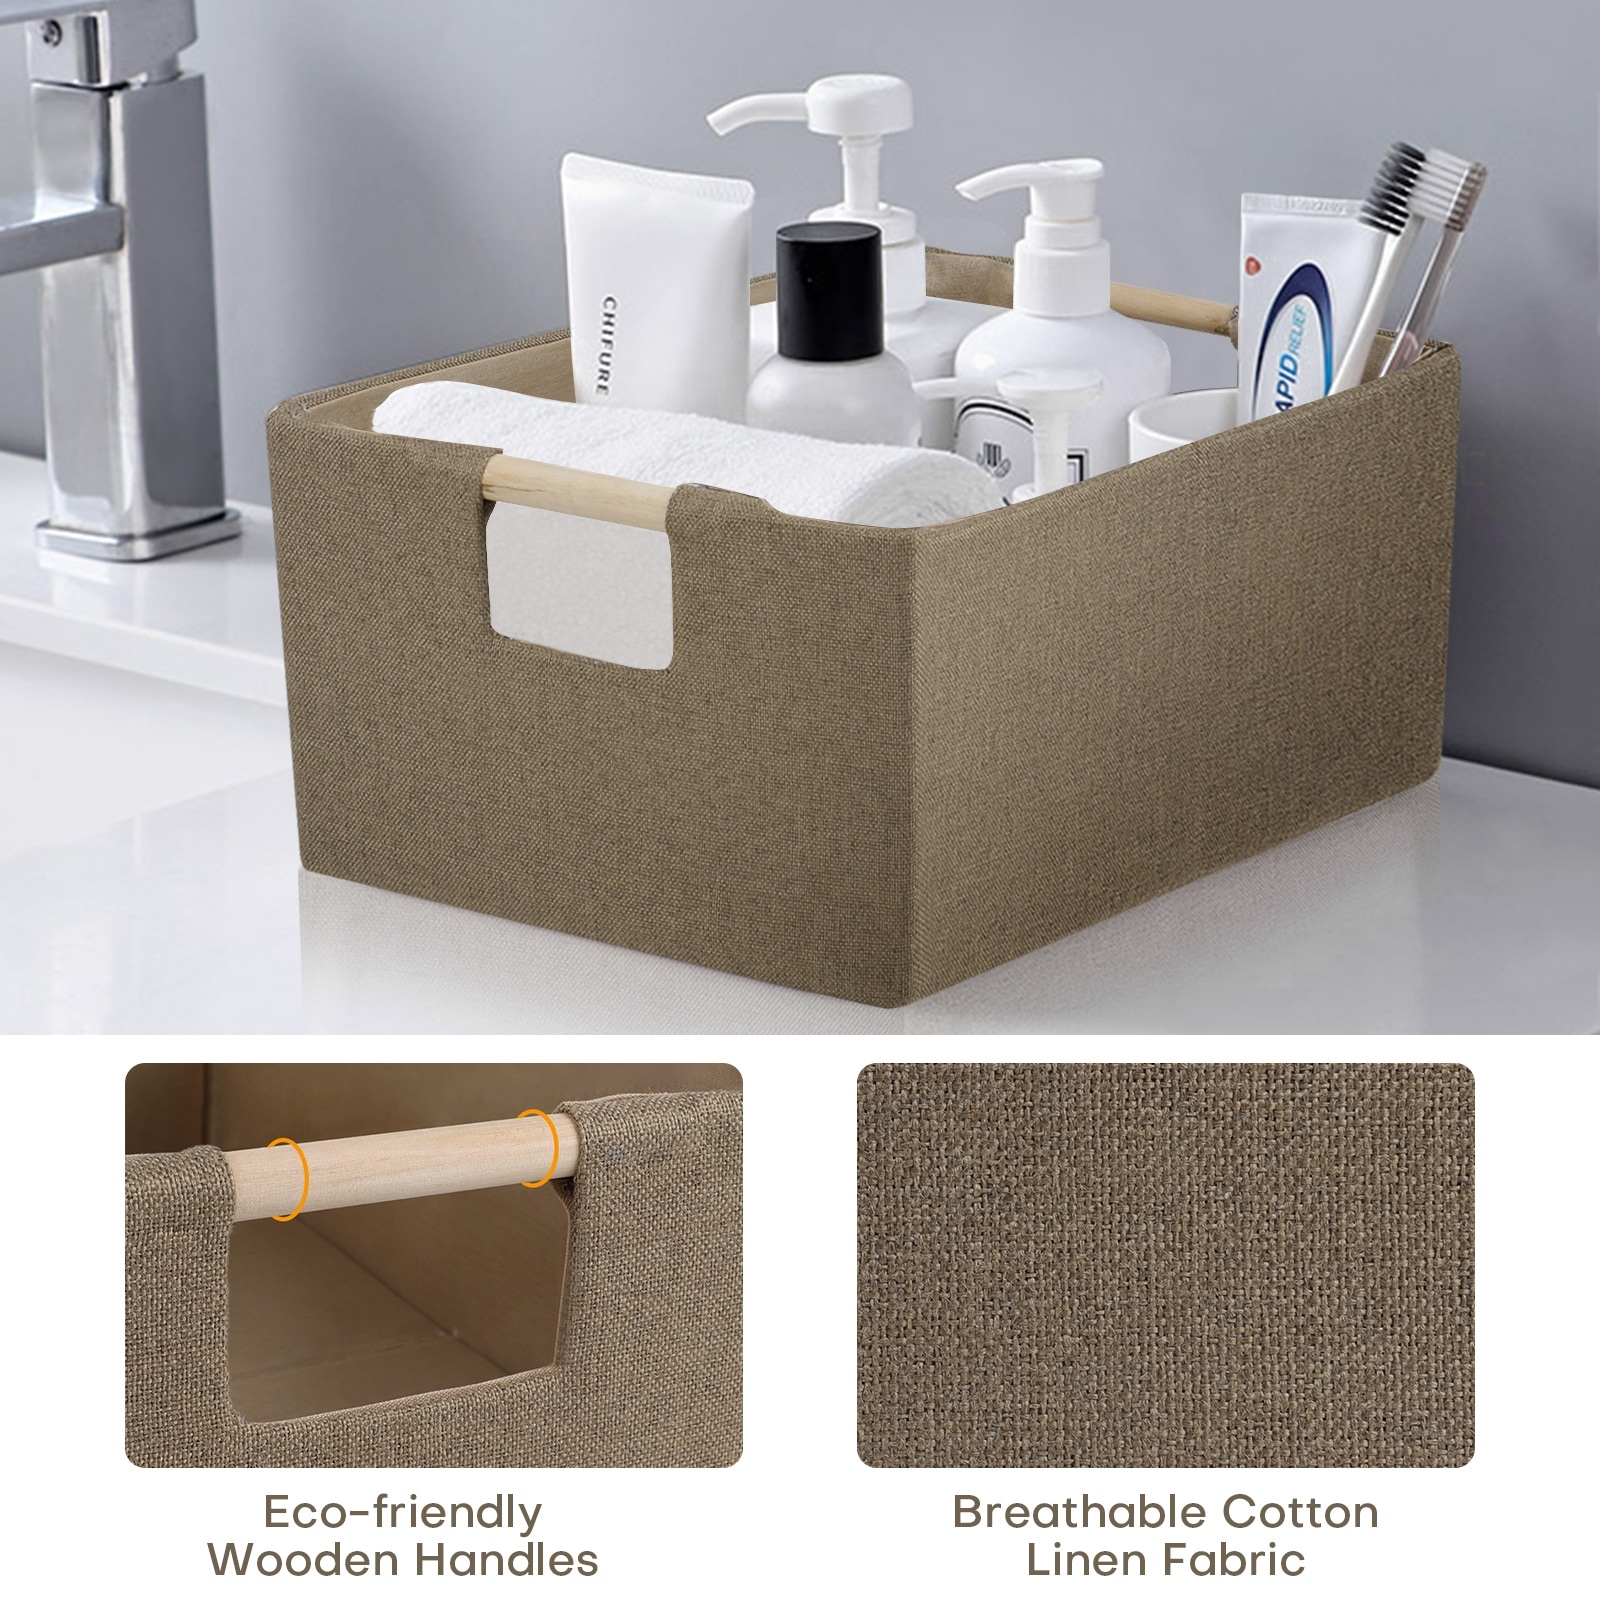 https://ak1.ostkcdn.com/images/products/is/images/direct/24e613119dc39b90add9fcc4bc627e40debd71c3/Fabric-Foldable-Storage-Bins-Organizer-Container-W-Wood-Handles-2Pcs.jpg